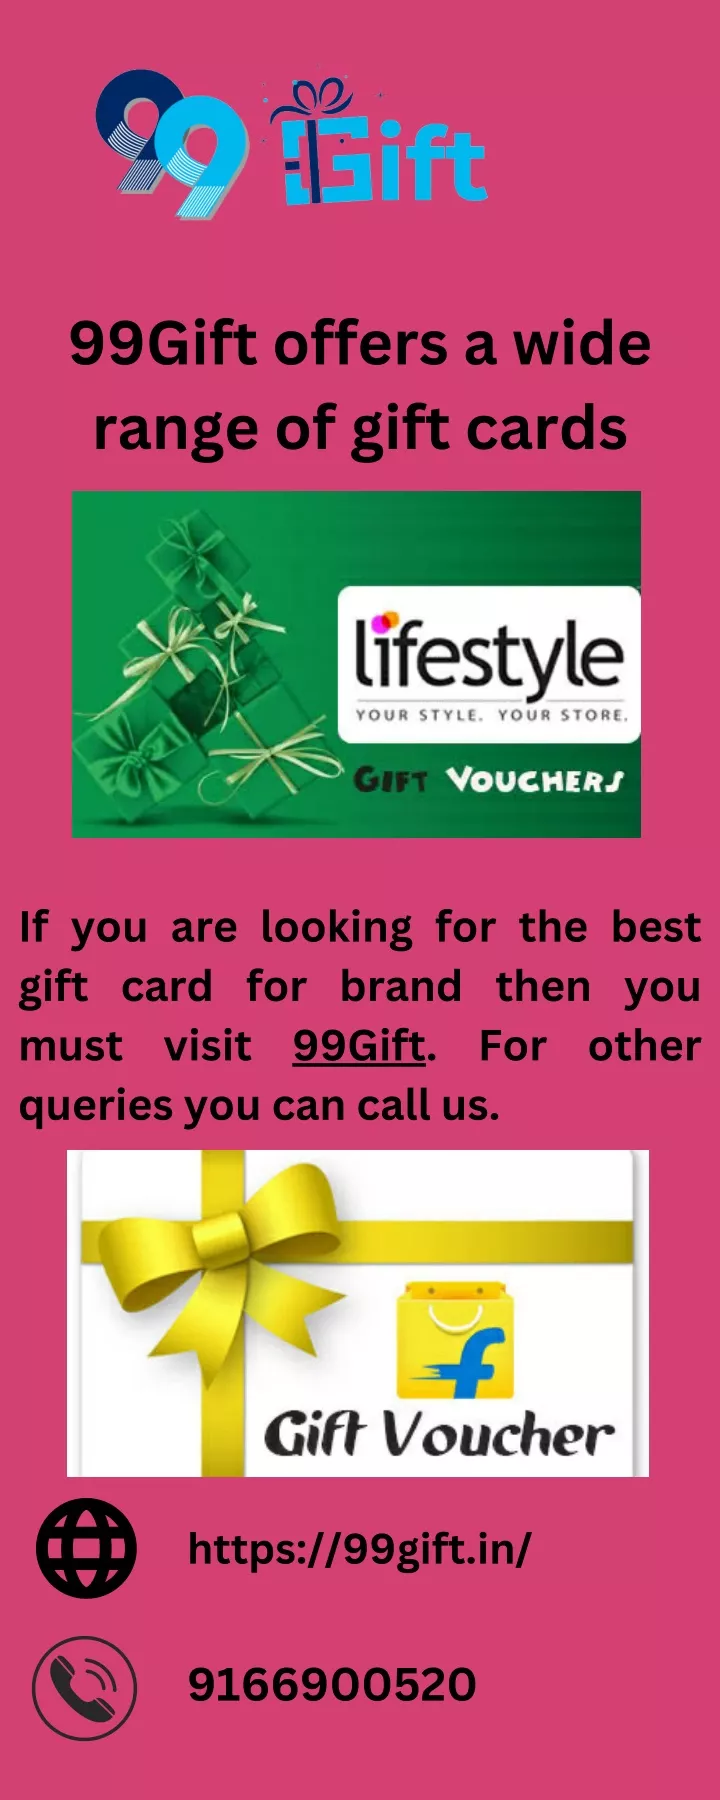 99gift offers a wide range of gift cards